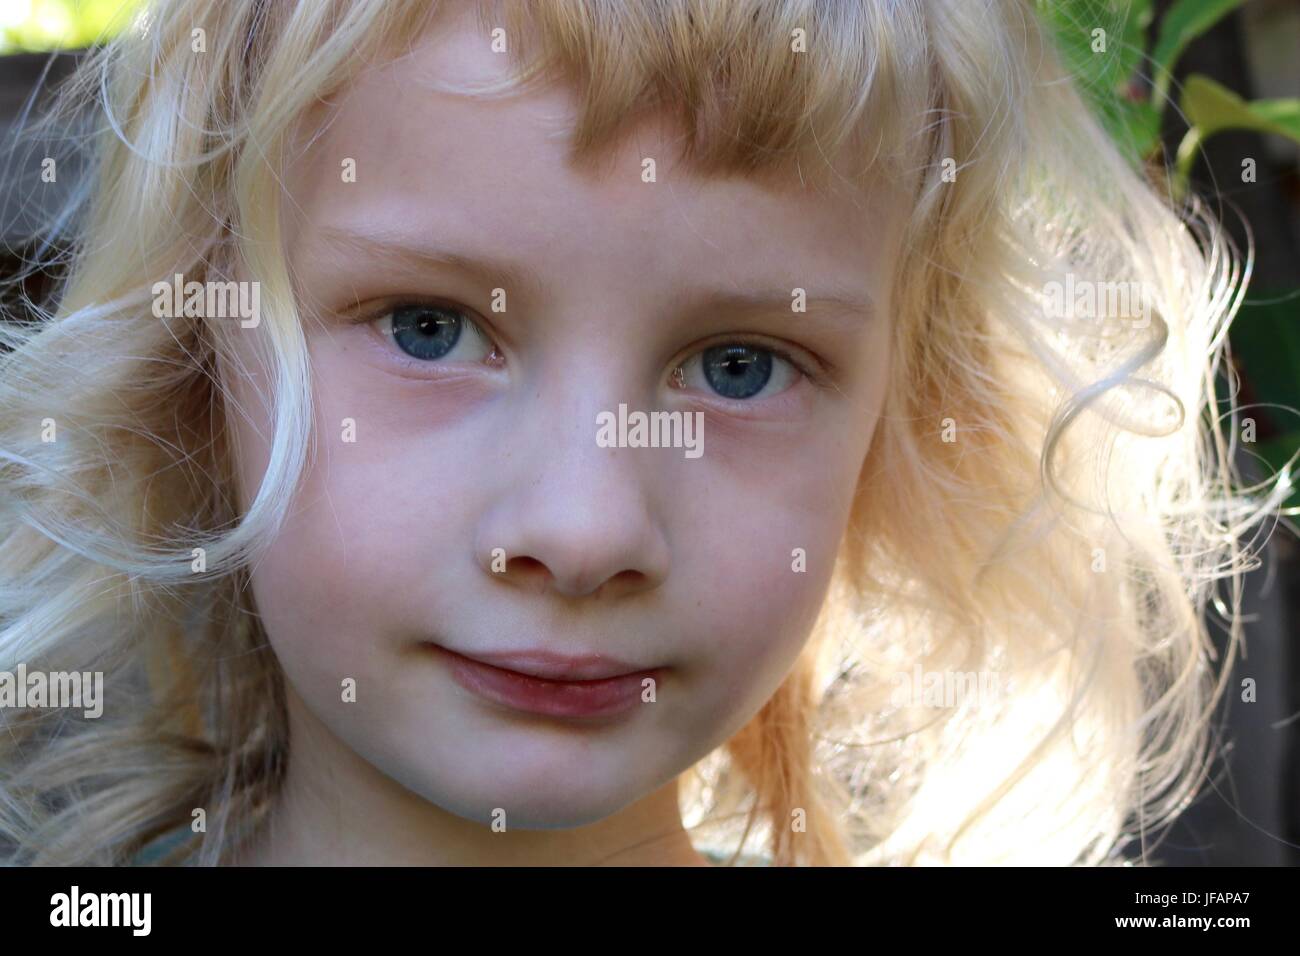 Portrait of fairy like child with golden hair and big blue eyes Stock Photo